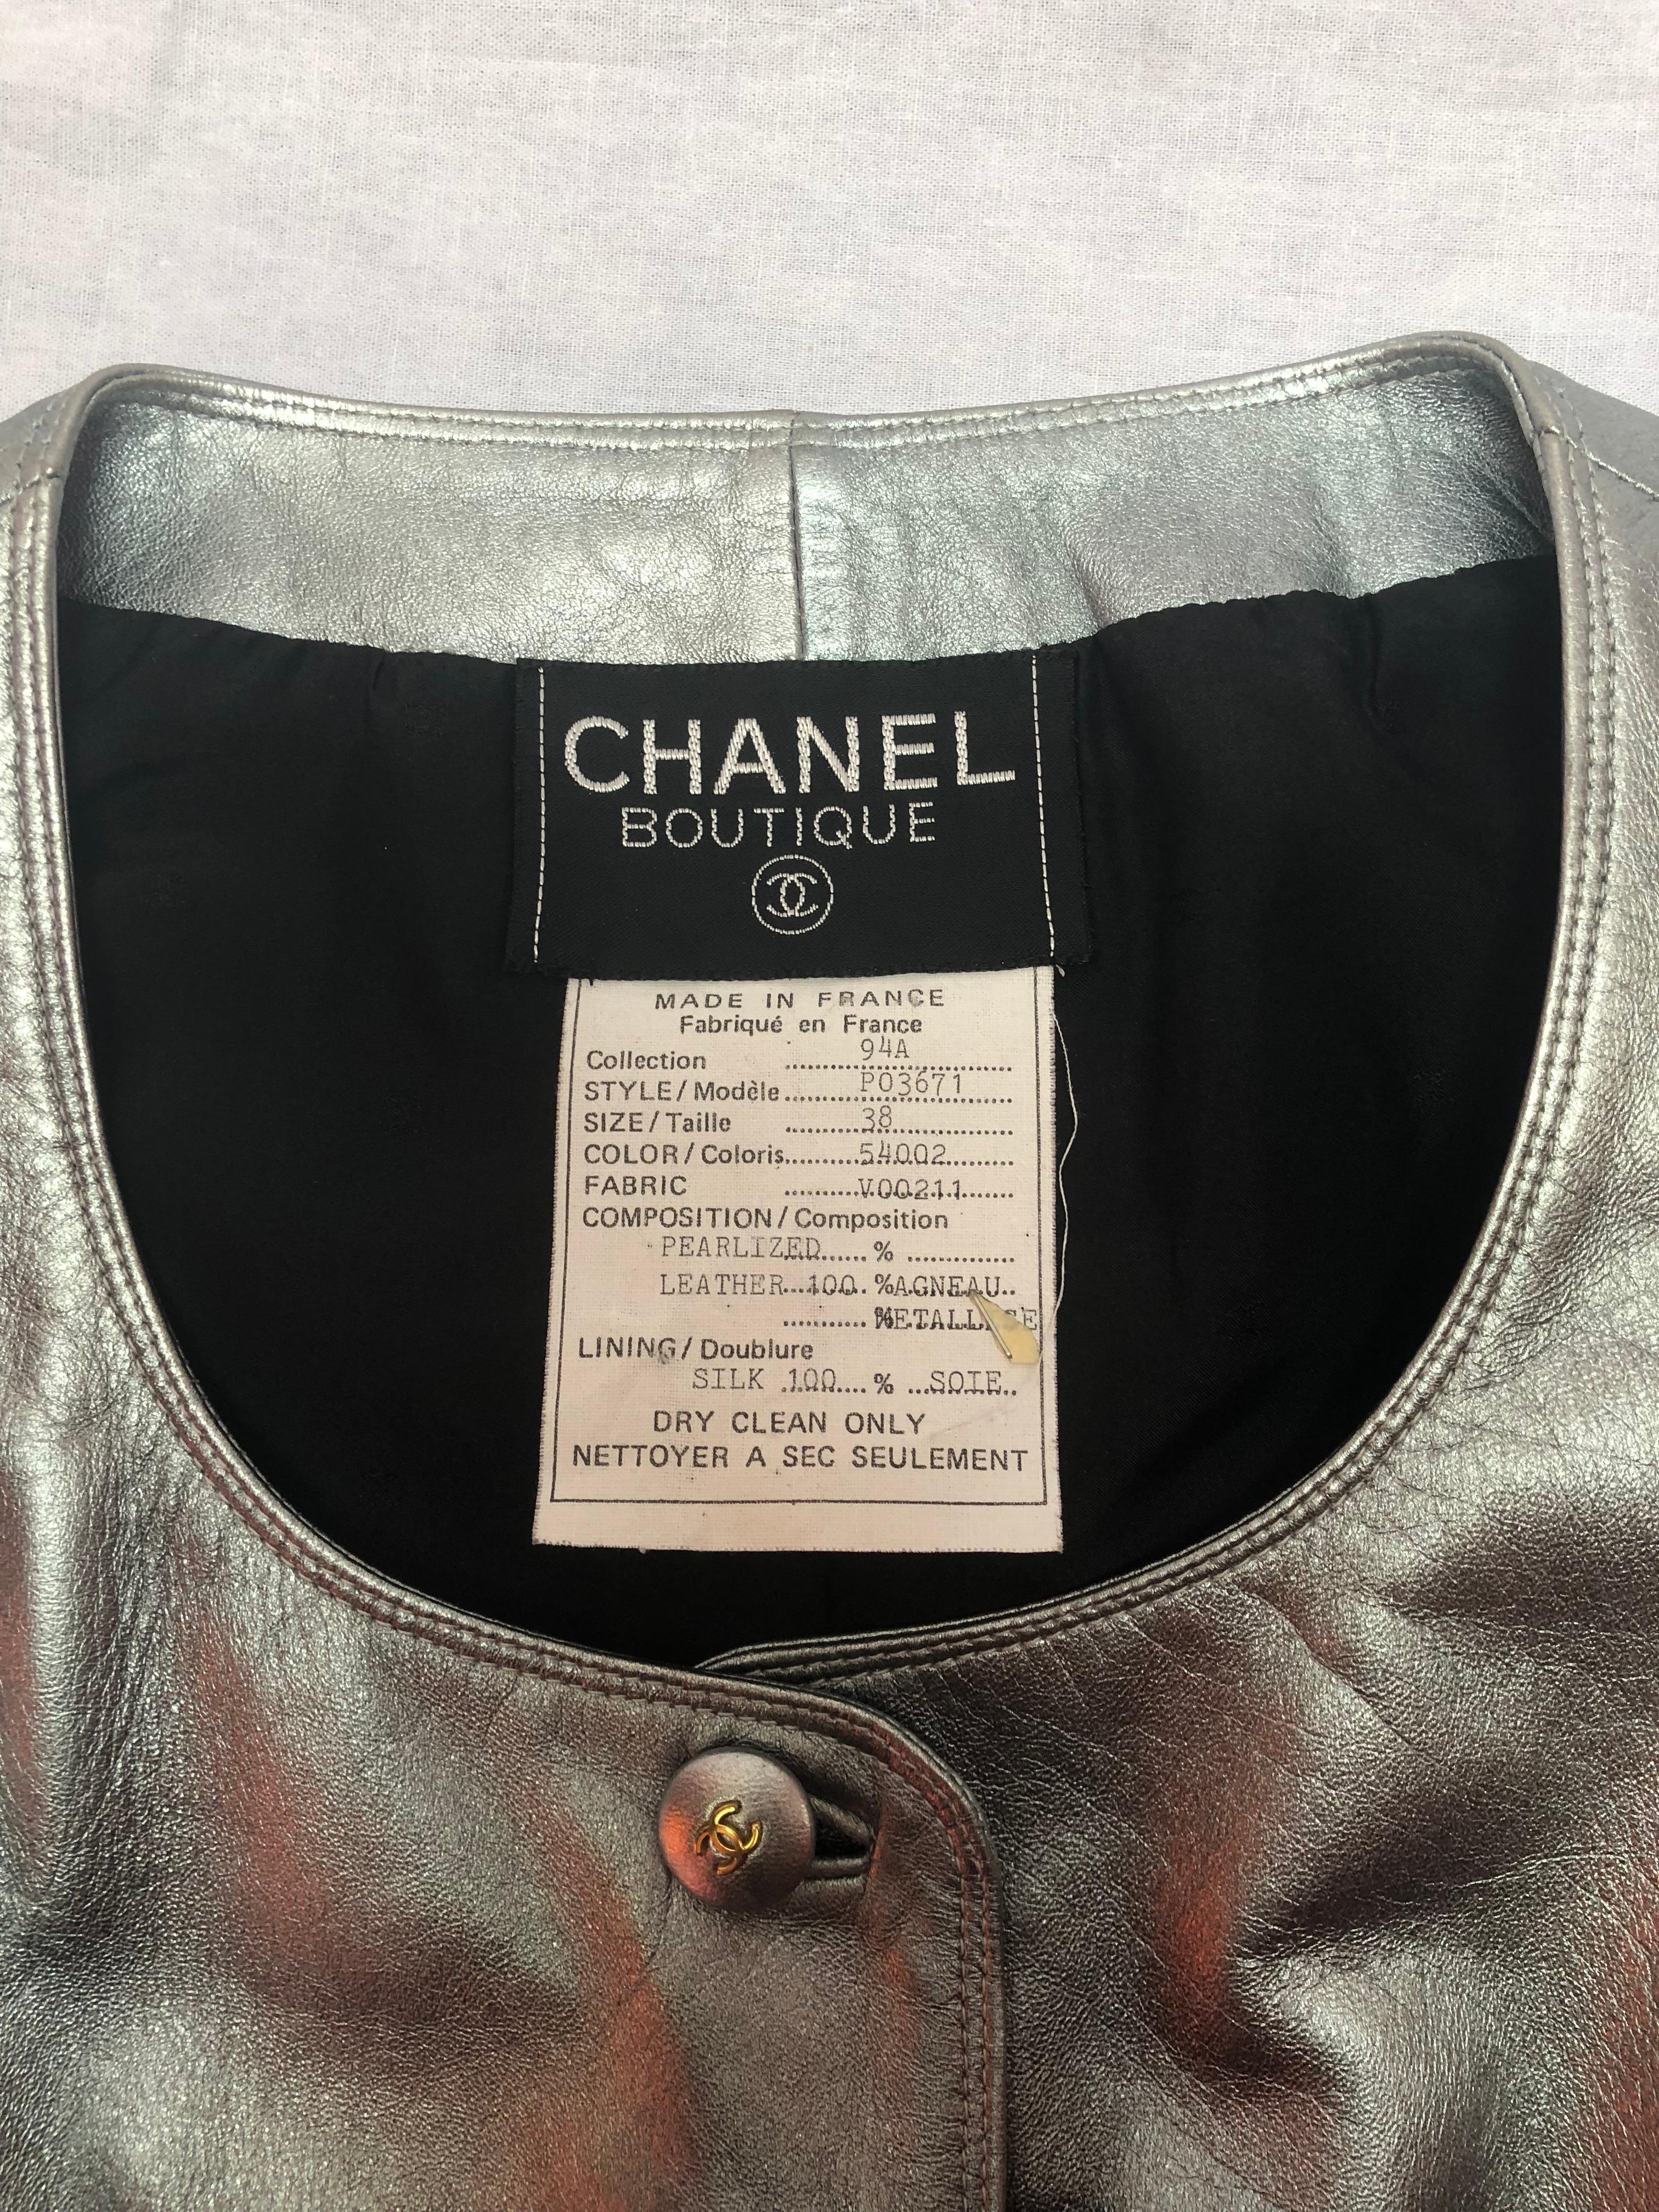 Chanel Vintage Vest. Silver, leather and silk lined with two front pockets. 
From 1994 Chanel collection. 
Size 38
Made in France
100% Lambskin leather 
Lining: 100% Silk
Leather covered buttons with gold tone CC logos
2 Front slip pockets 
16.25